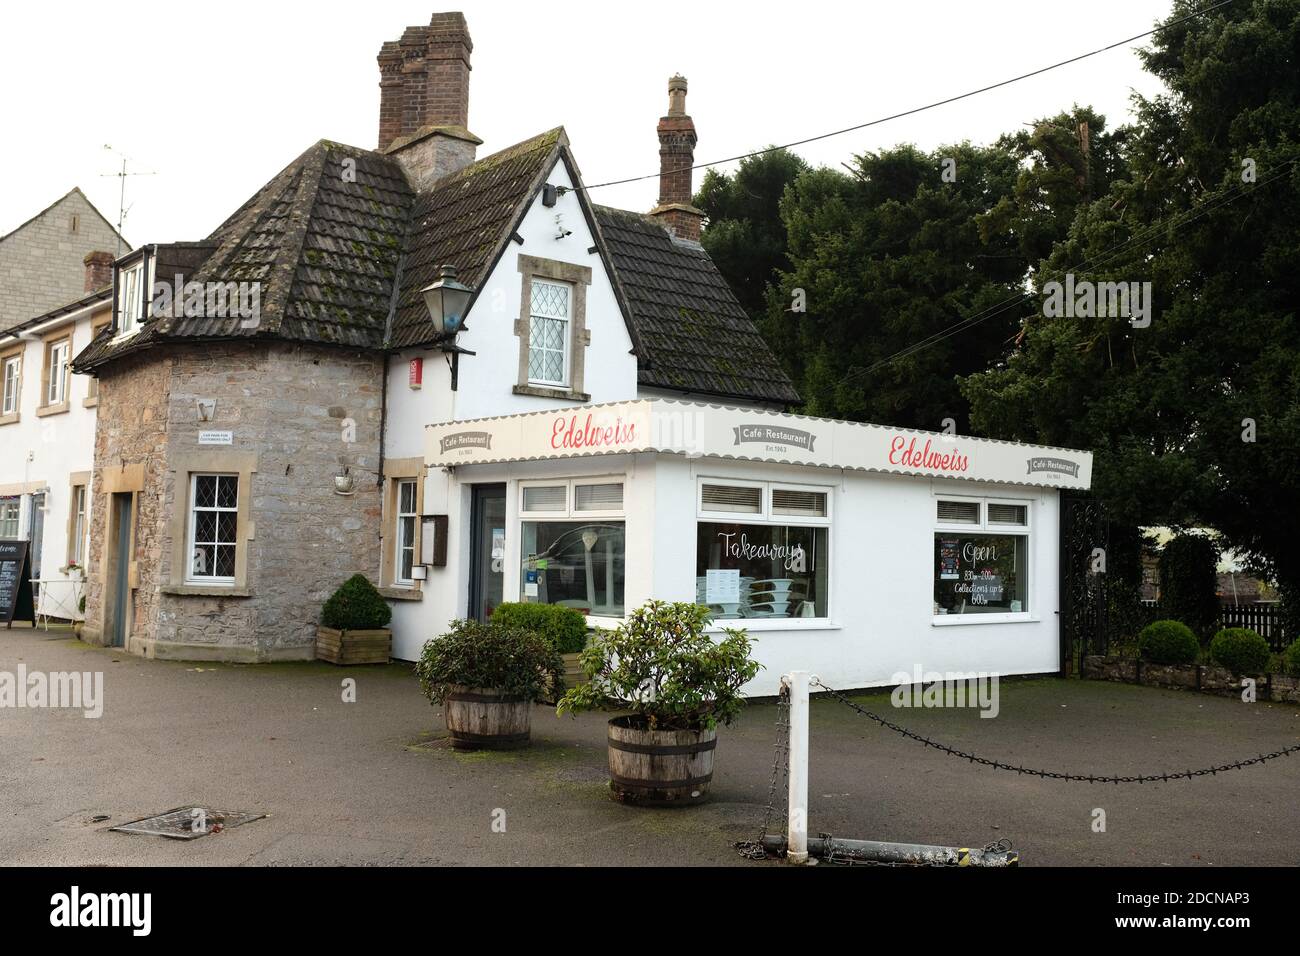 November 2020 - Edelweiss, a well known cafe & restaurant at the base of the gorge in Cheddar, Somerset. Stock Photo